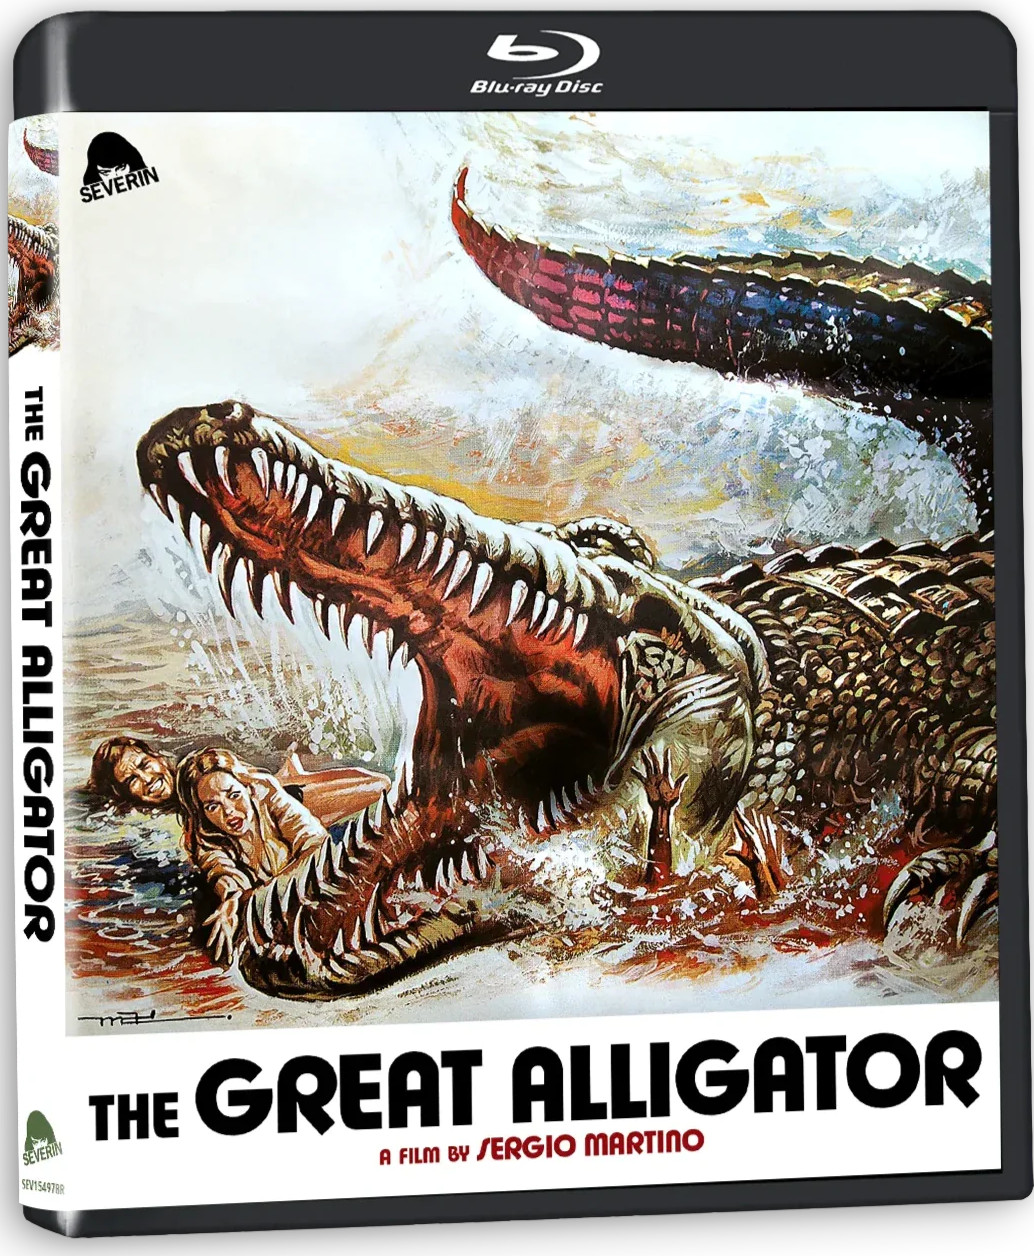 The Great Alligator